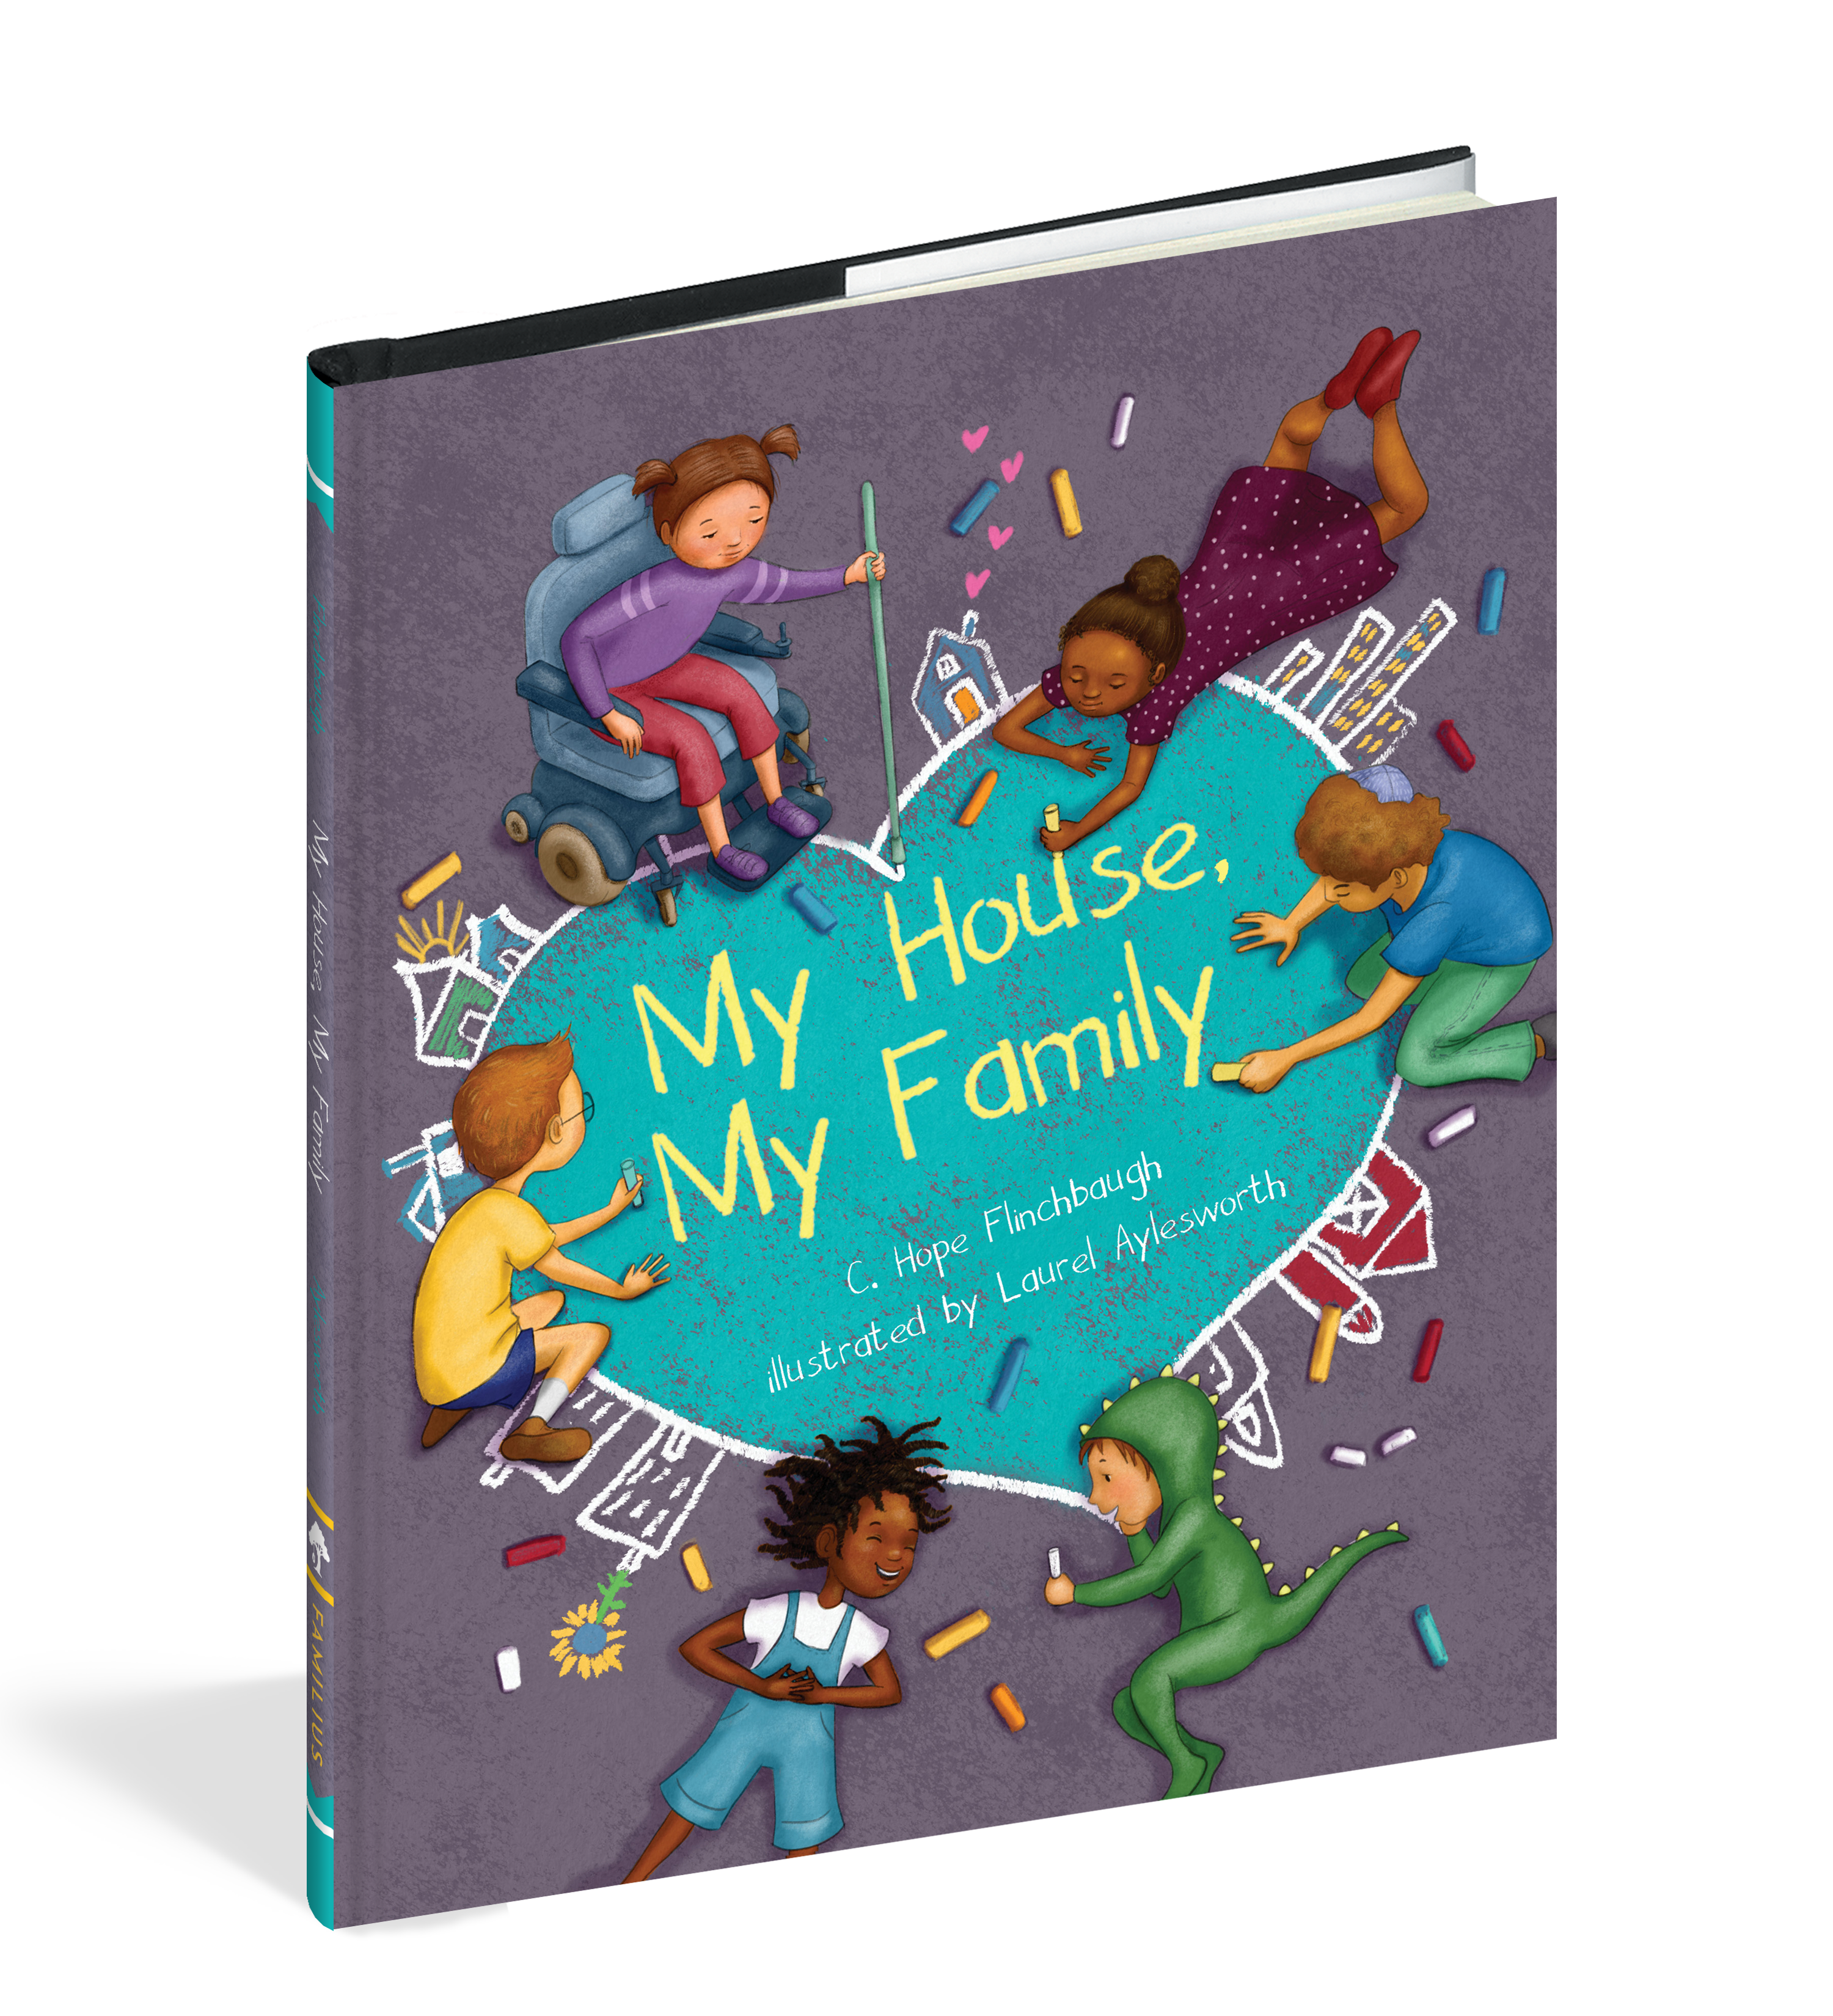 The cover of the book My House, My Family.